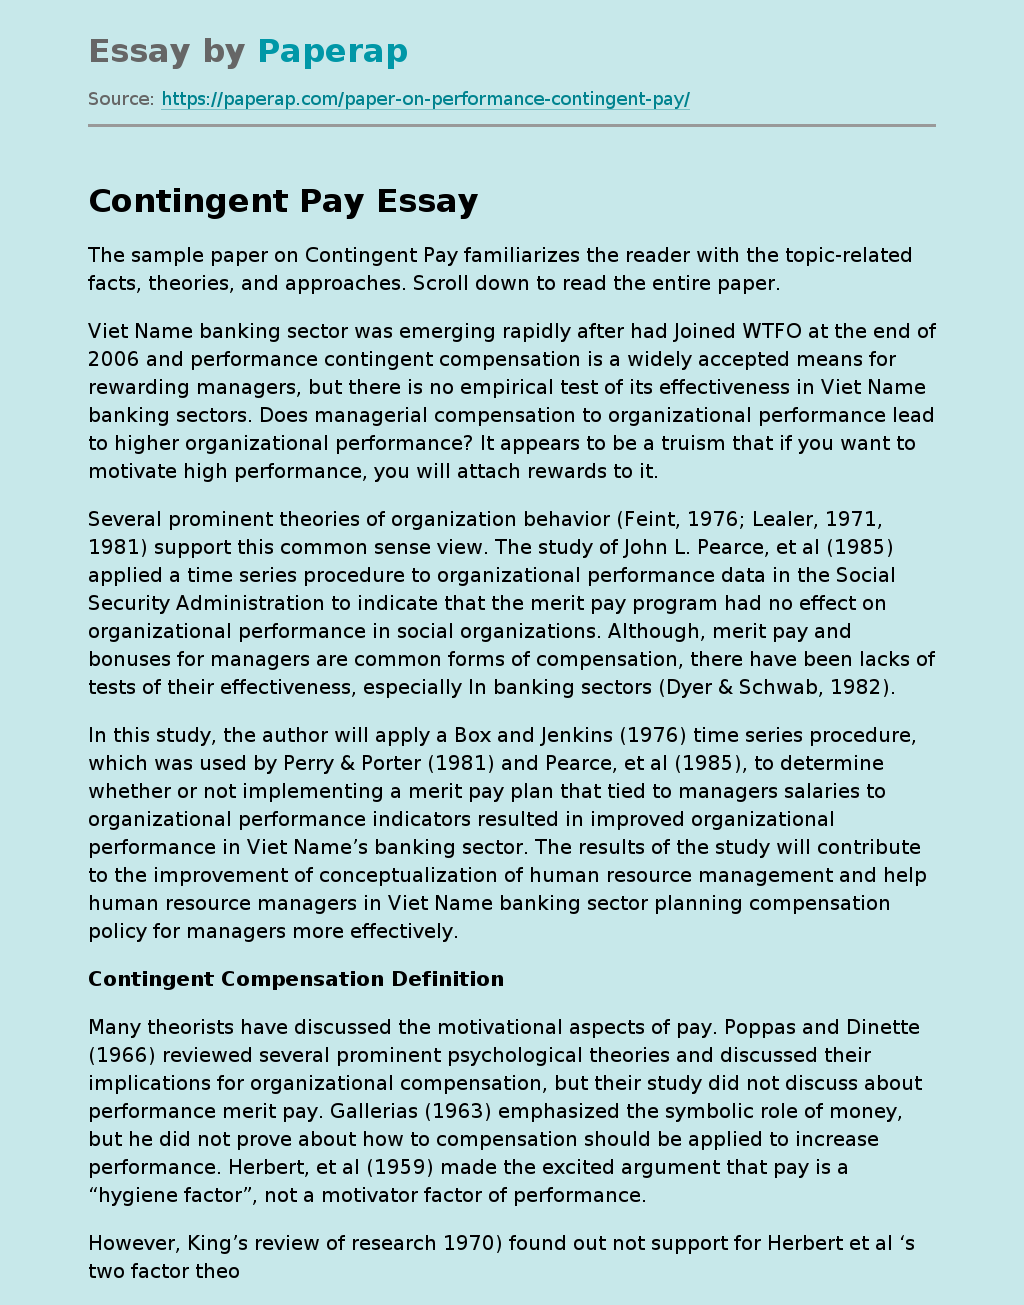 Contingent Pay